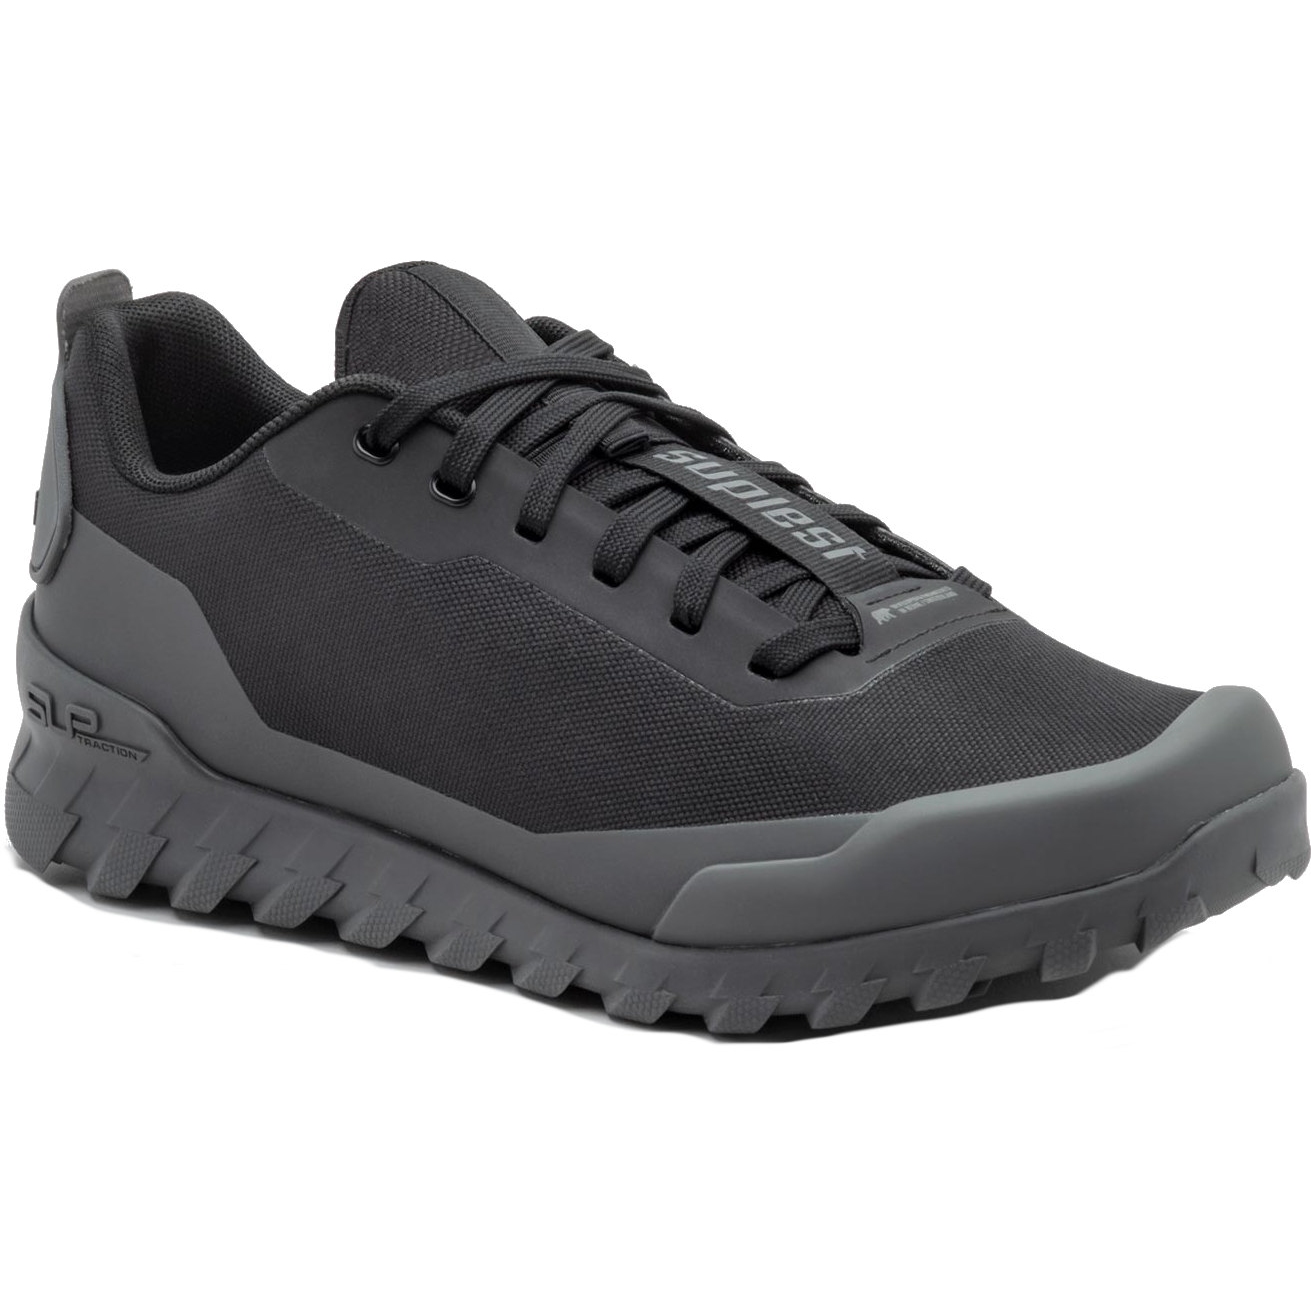 Picture of Suplest Trail Sport MTB Shoes - black/grey 03.052.